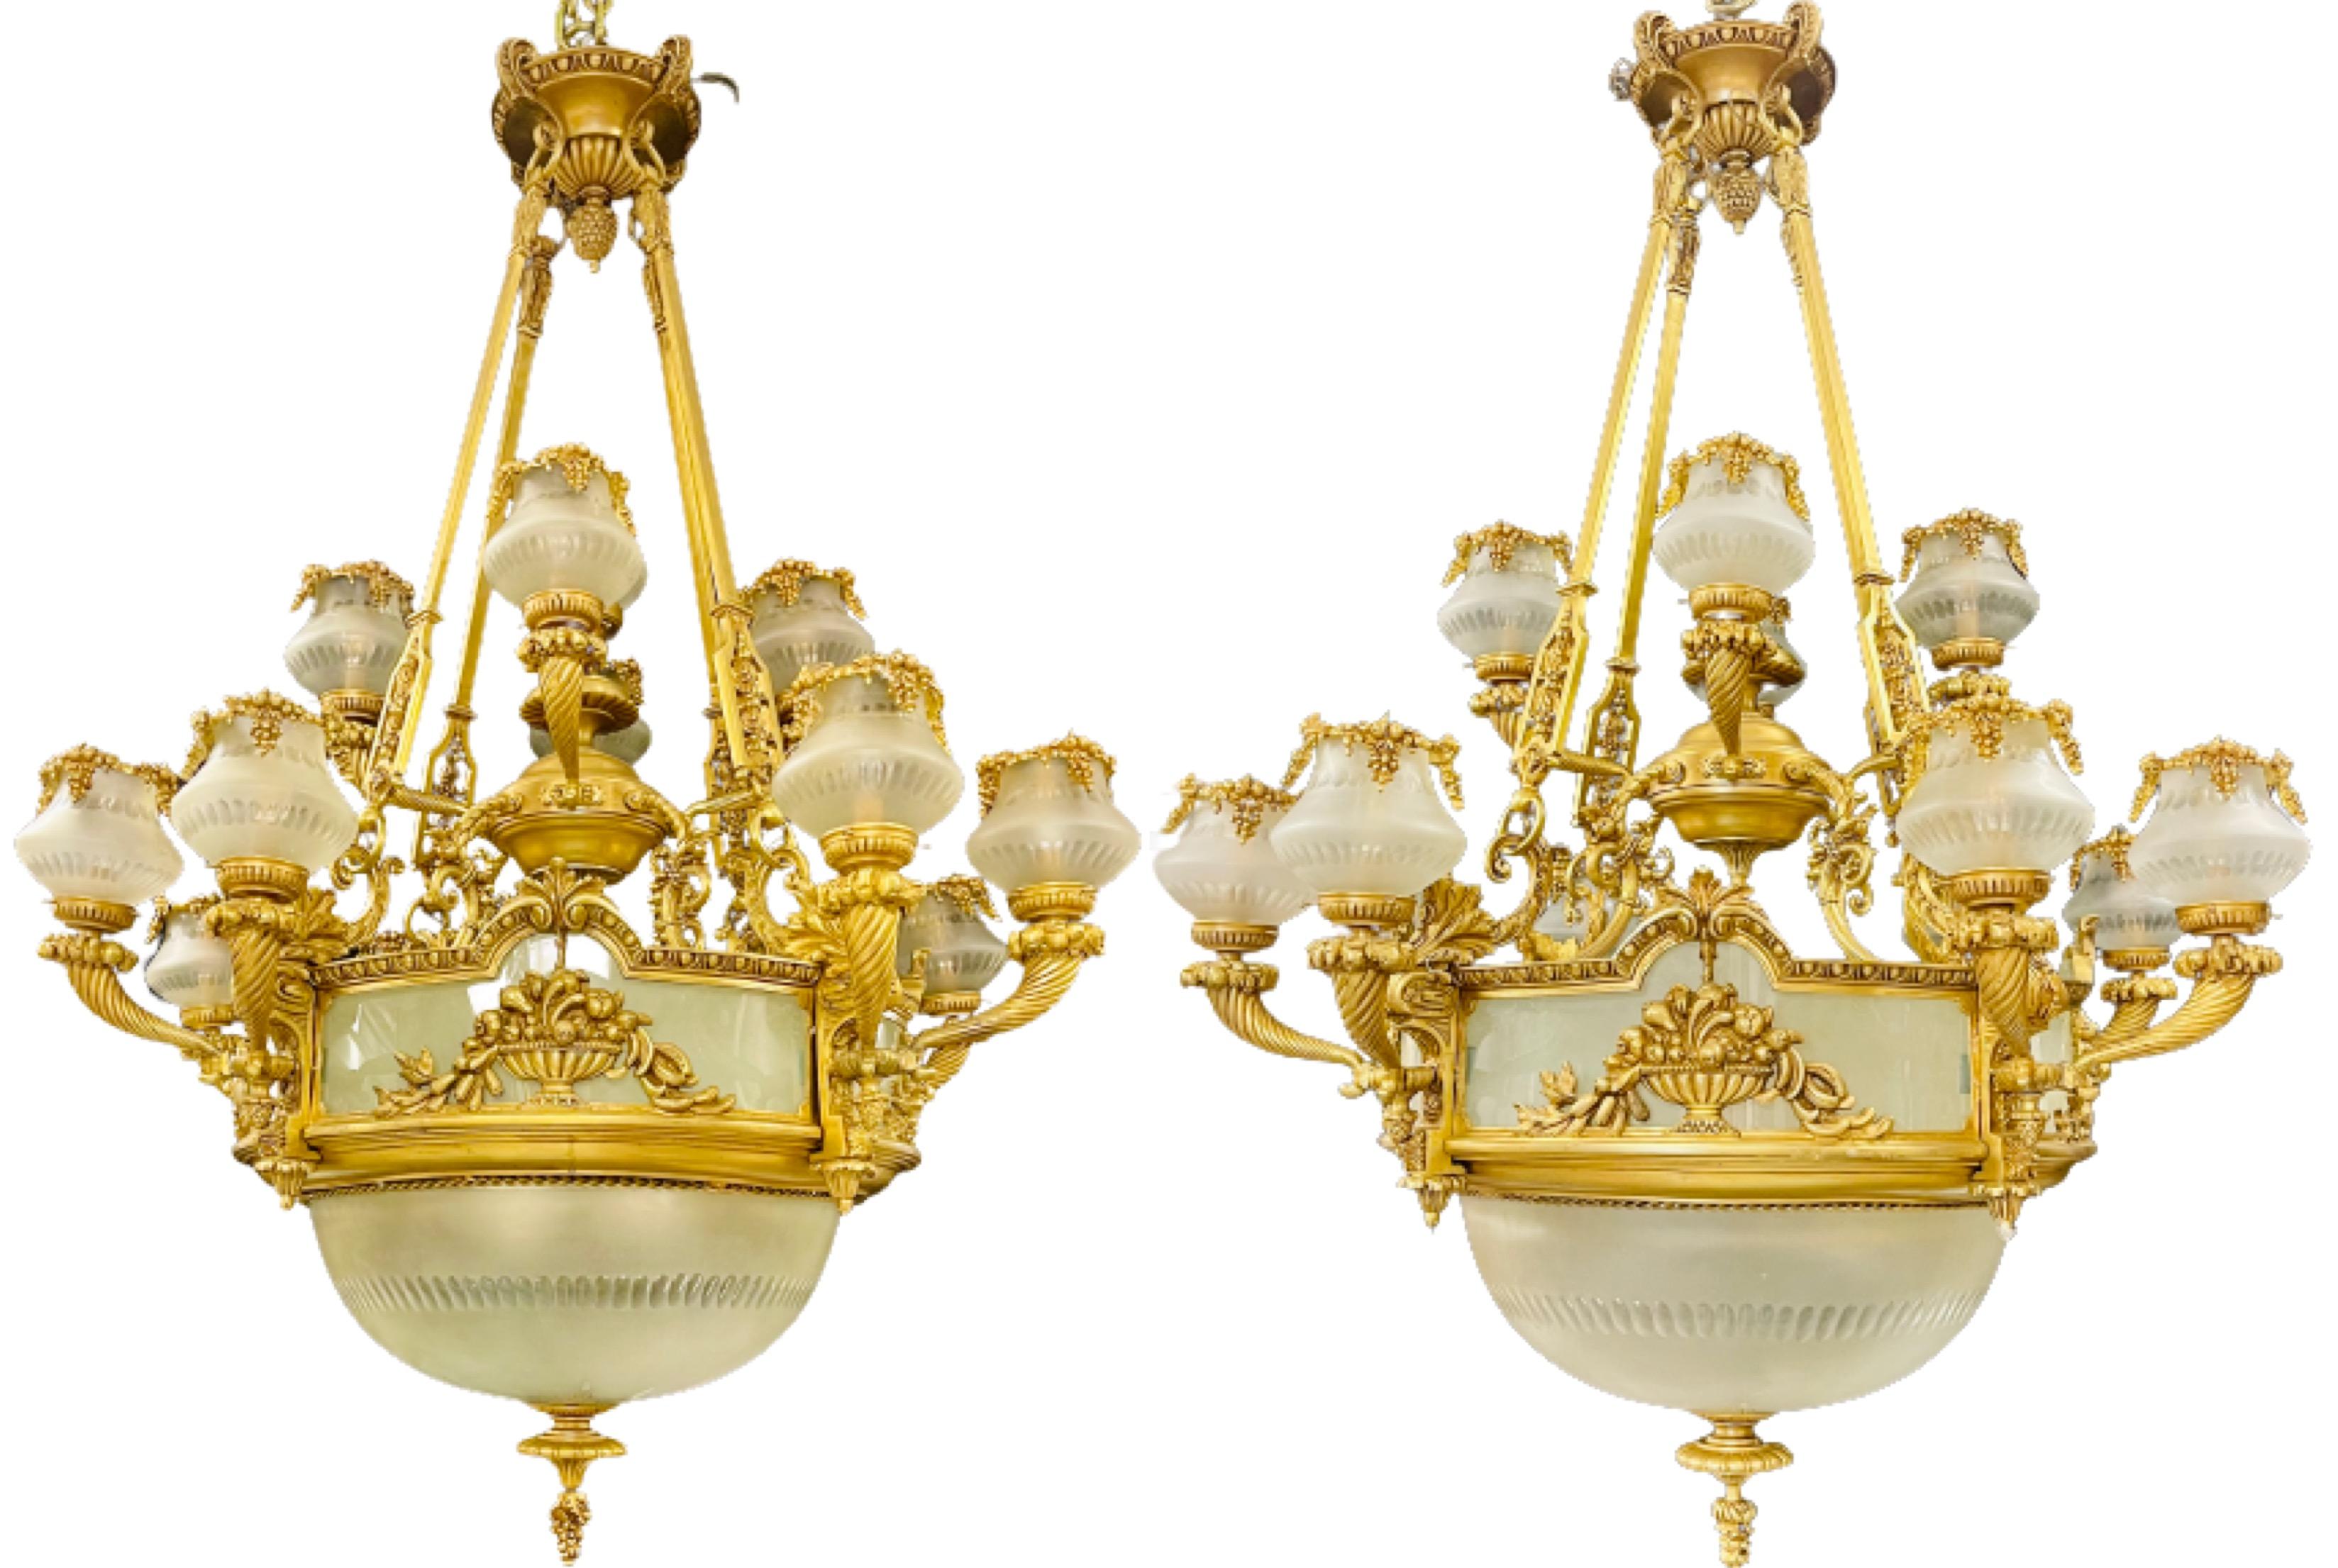 Pair of Louis XVI style bronze chandeliers. A large and impressive palatial pair of gilt bronze chandelier having 13 lighted arms with four bulbs on the interior of the large frosted glass bowl. This finely cast chandelier has a permanently fixed